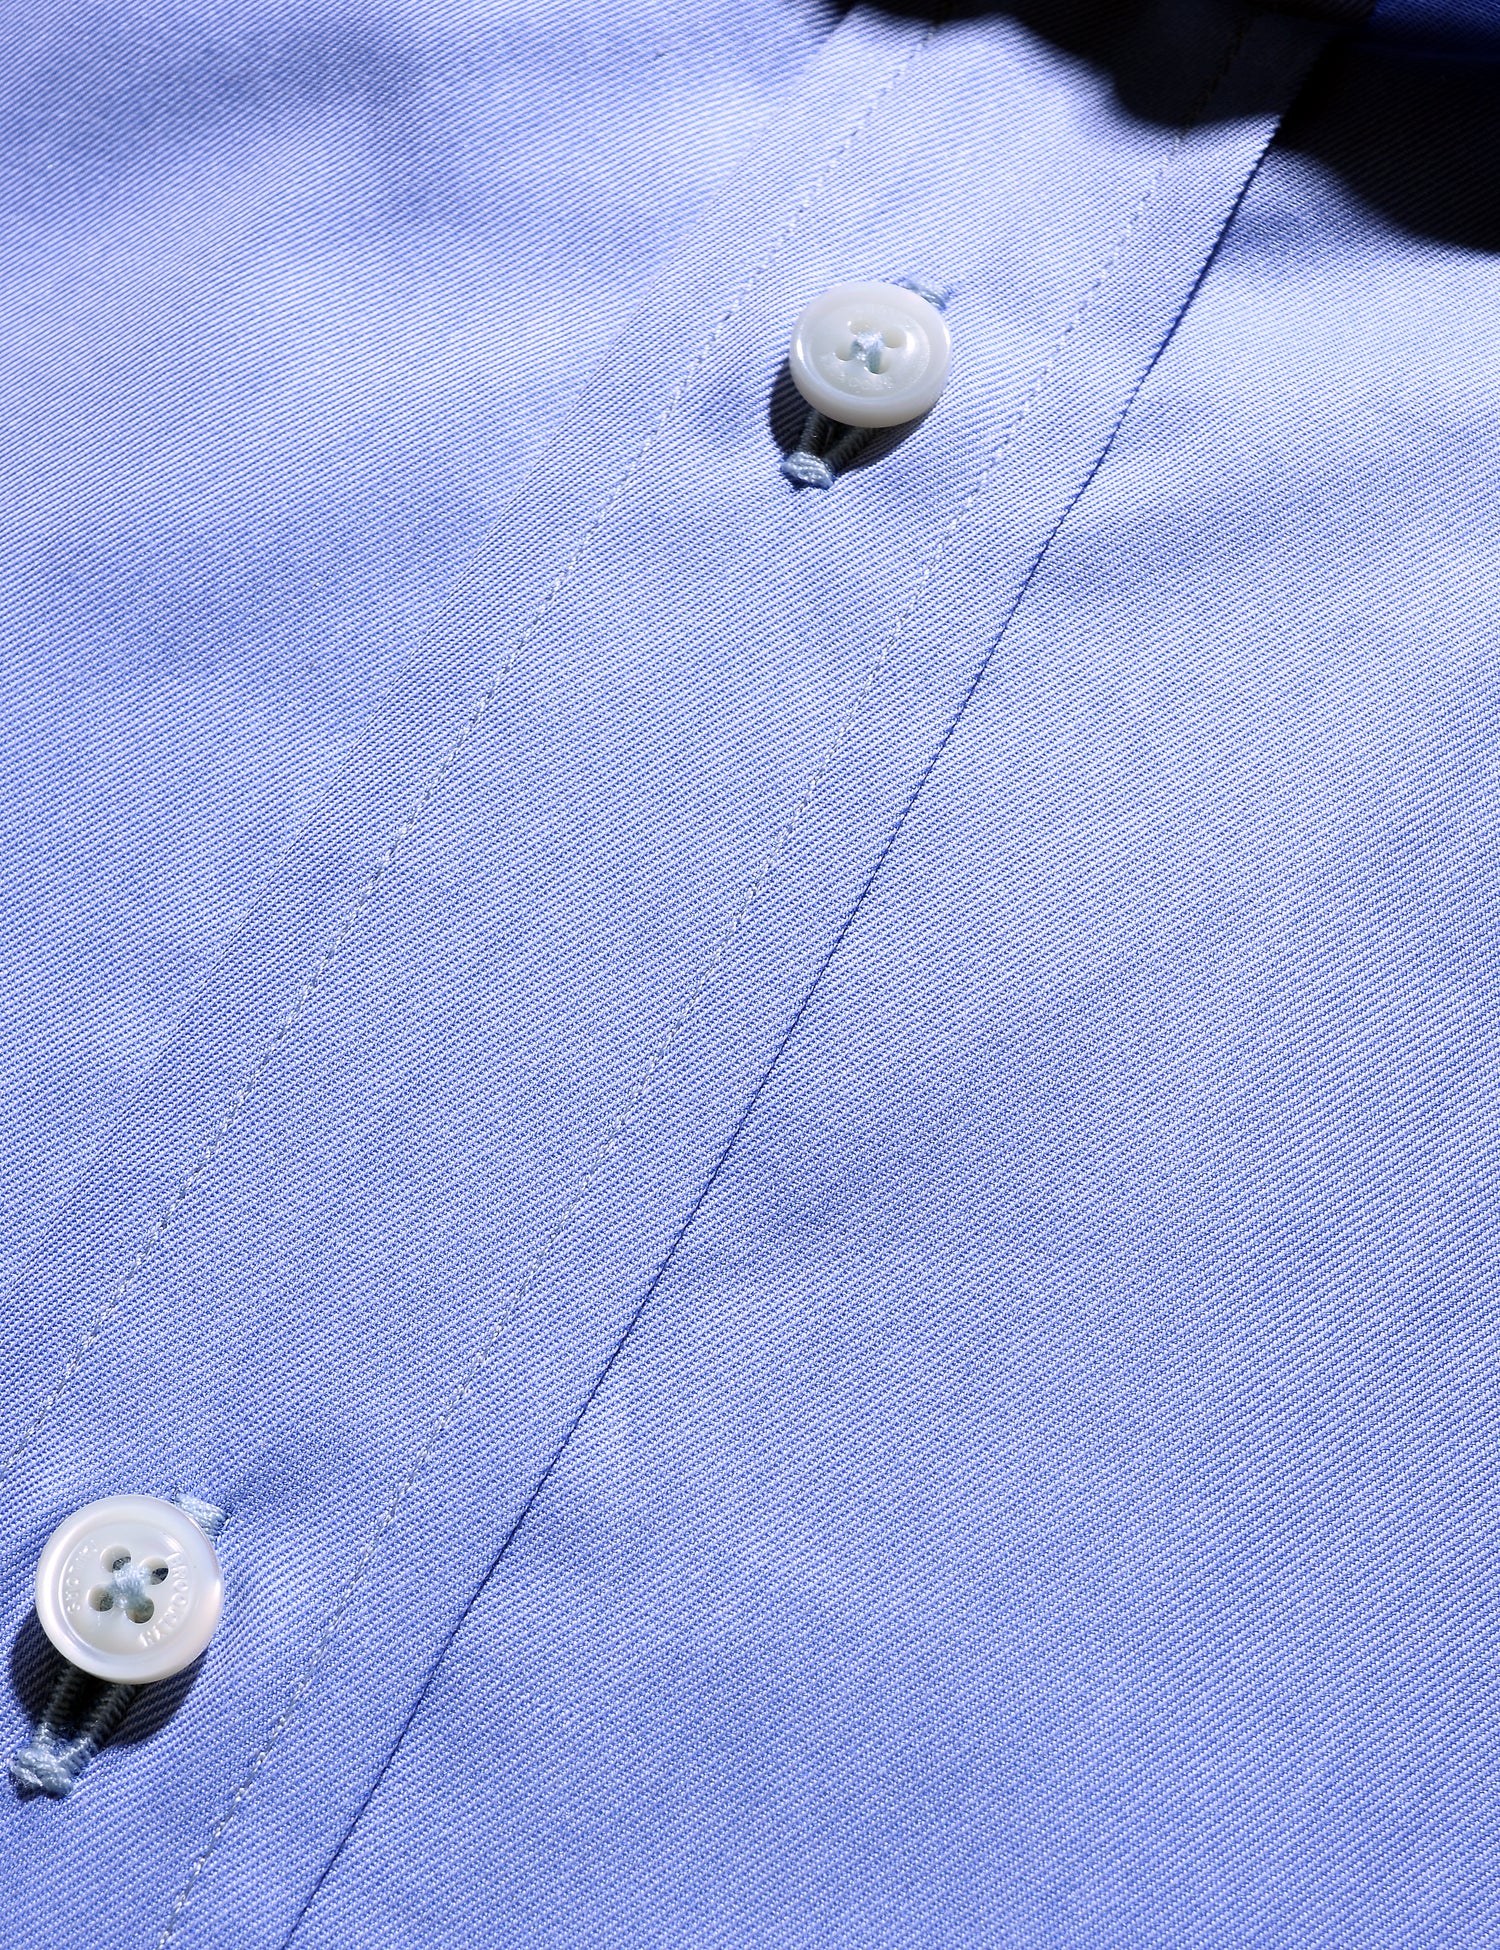 Detail shot of buttons and fabric texture of Brooklyn Tailors BKT20 Slim Dress Shirt in Cotton Twill - Blue